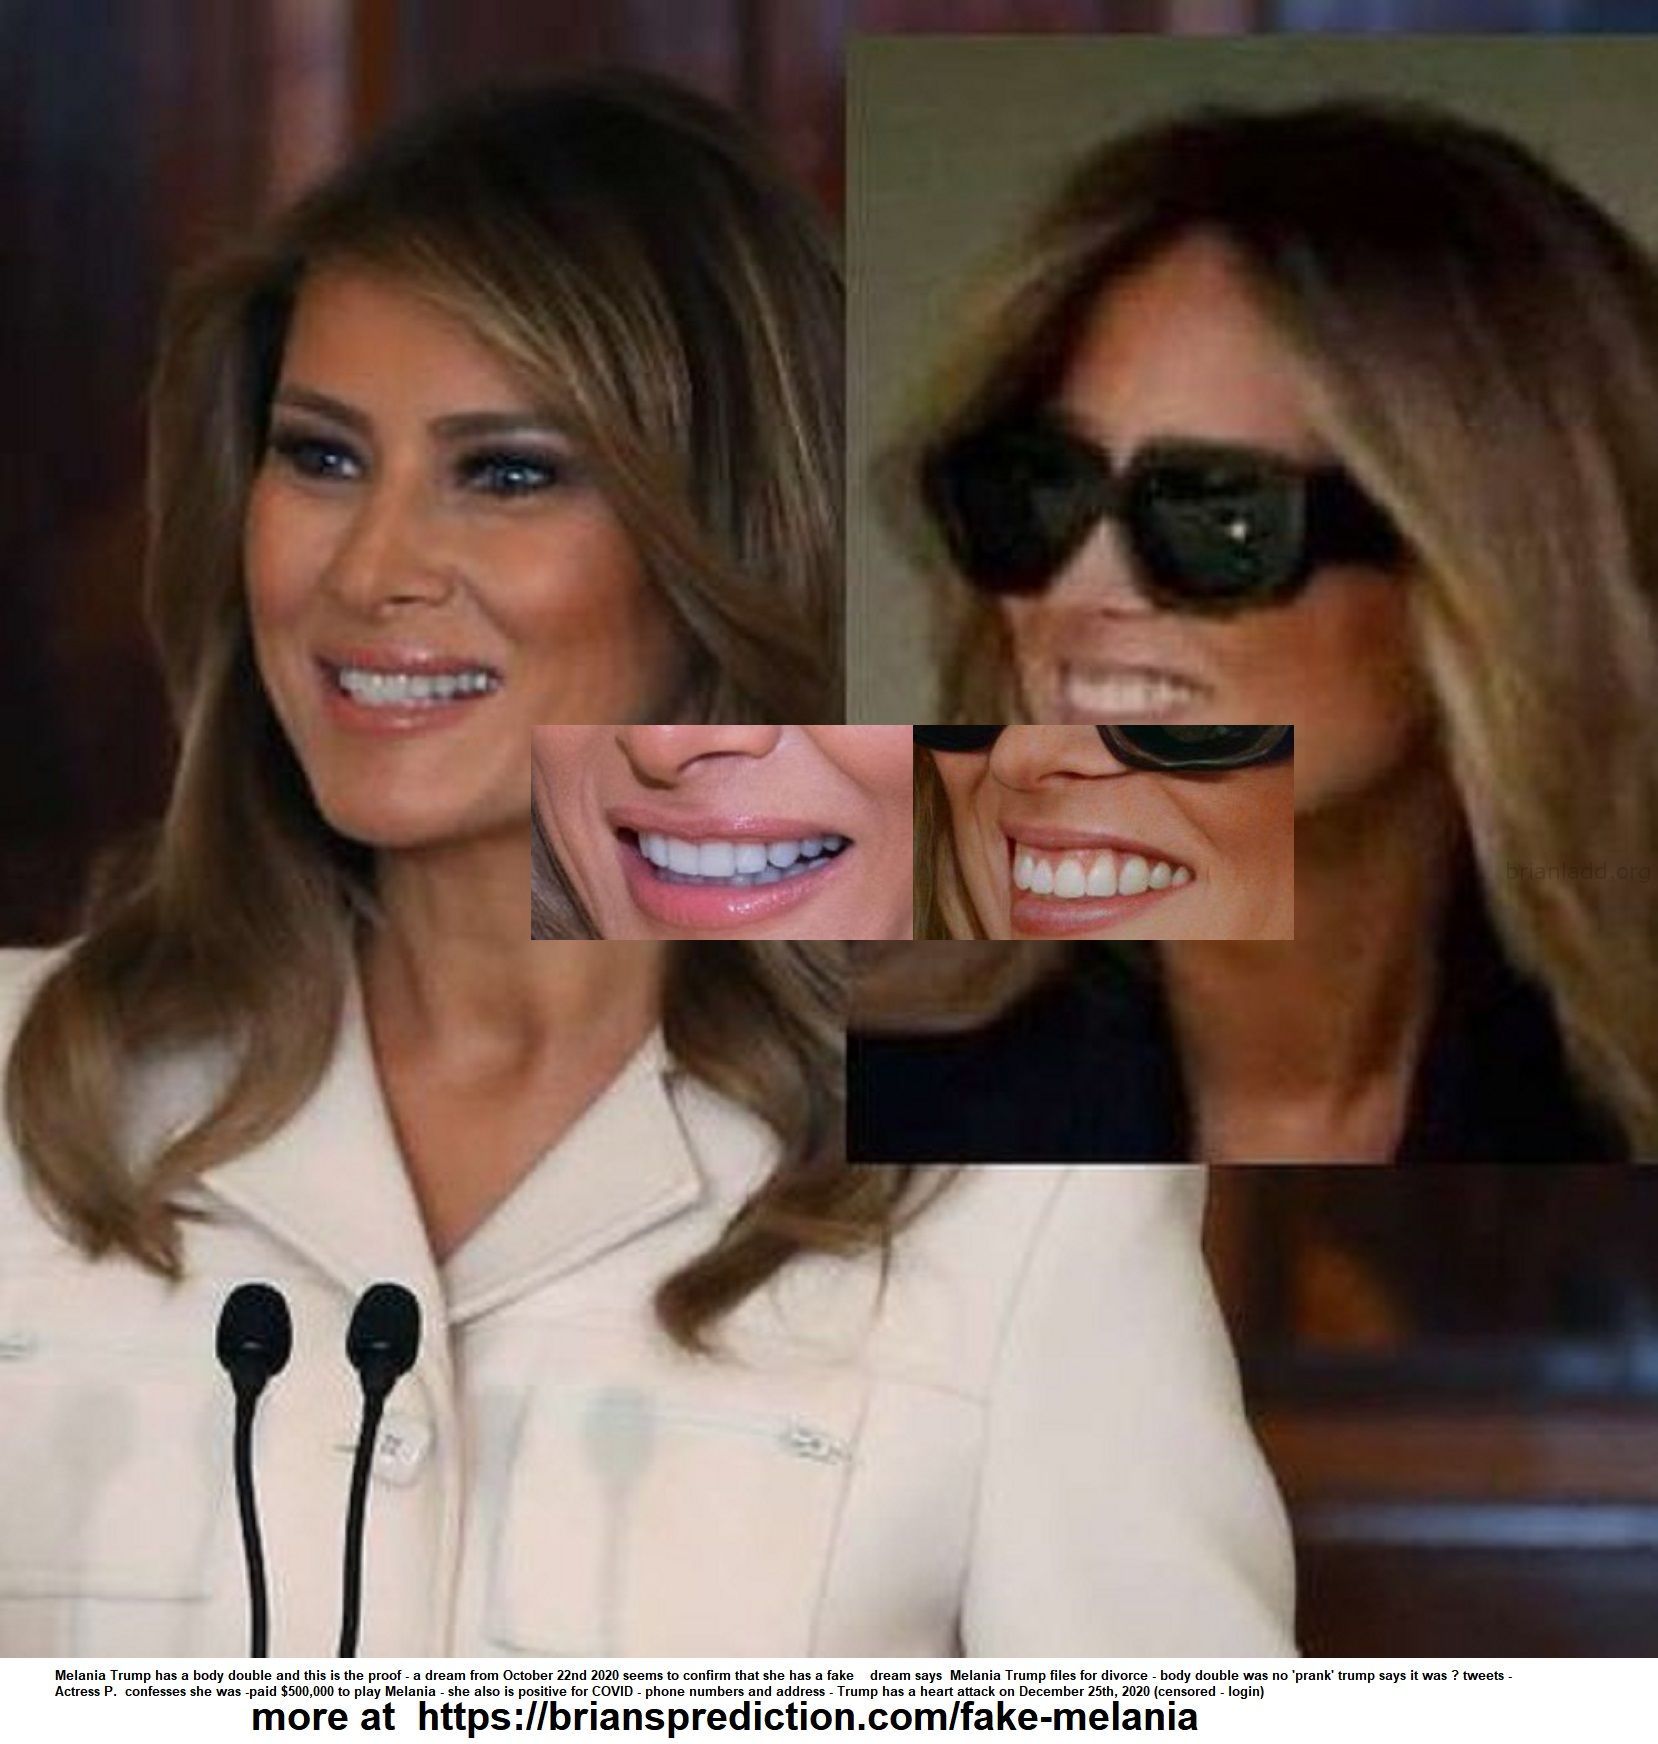 Fake Melania Trump Proof Psychic 2 - Melania Trump Has A Body Double And This Is The Proof - A Dream From October 22nd 2...
Melania Trump Has A Body Double And This Is The Proof - A Dream From October 22nd 2020 Seems To Confirm That She Has A Fake  Dream Says  Melania Trump Files For Divorce - Body Double Was No 'prank' Trump Says It Was ? Tweets - Actress P.  Confesses She Was -paid $500,000 To Play Melania - She Also Is Positive For Covid - Phone Numbers And Address - Trump Has A Heart Attack On December 25th 2020 (censored - Login)  More At   https://briansprediction.com/Fake-Melania
